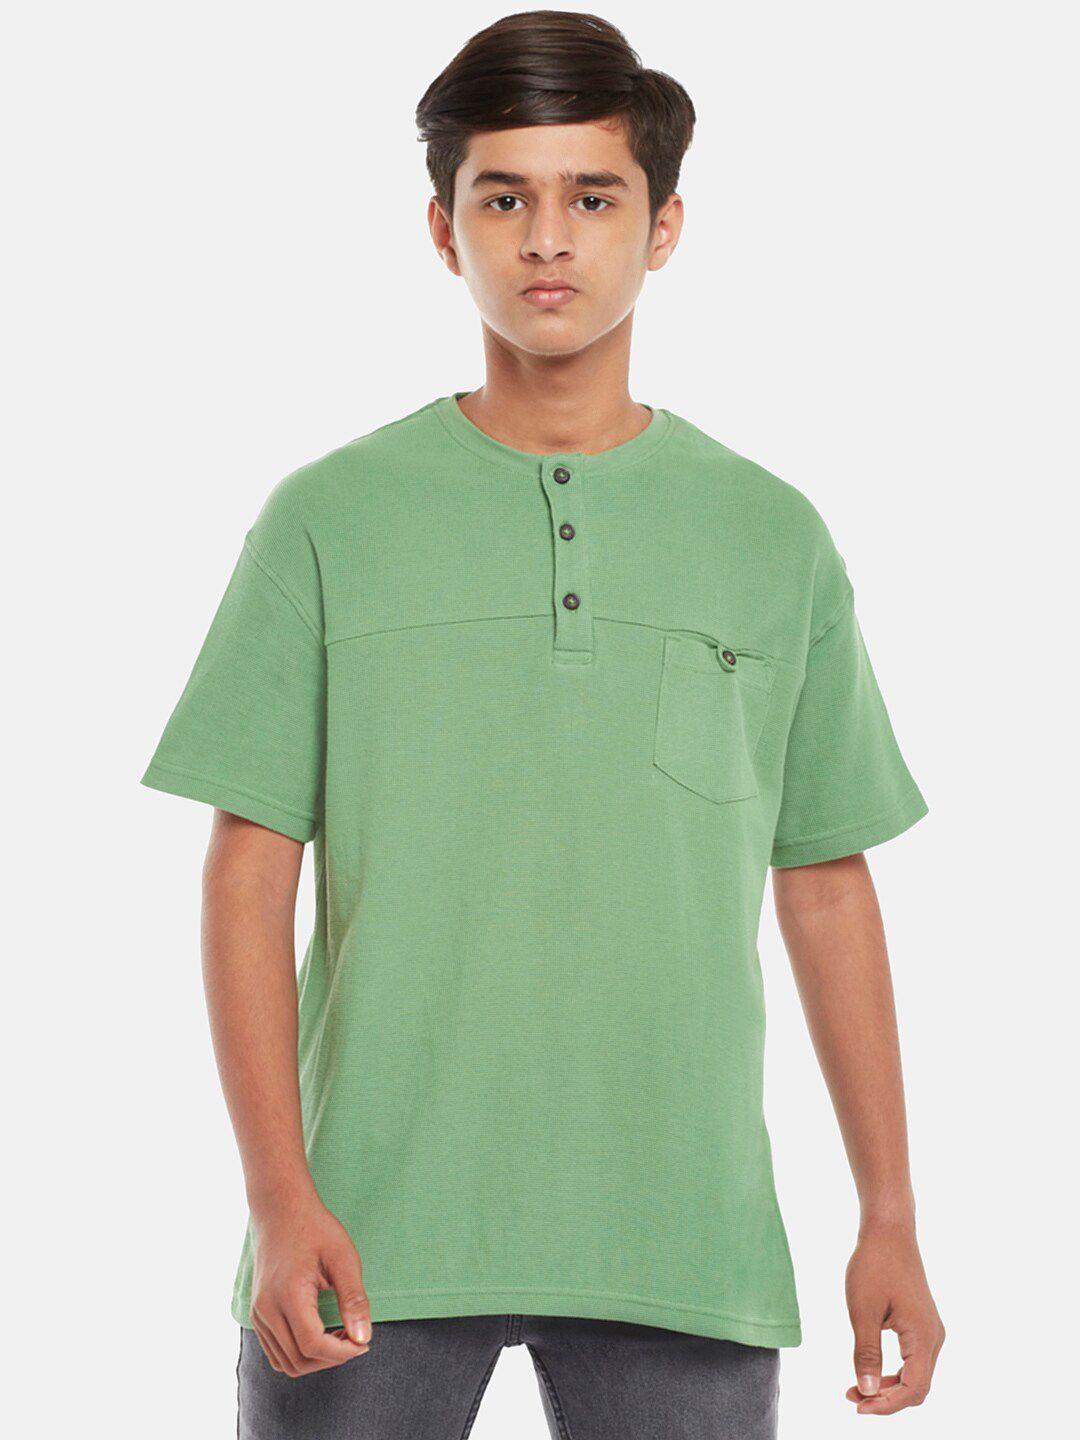 coolsters by pantaloons boys olive green henley neck t-shirt